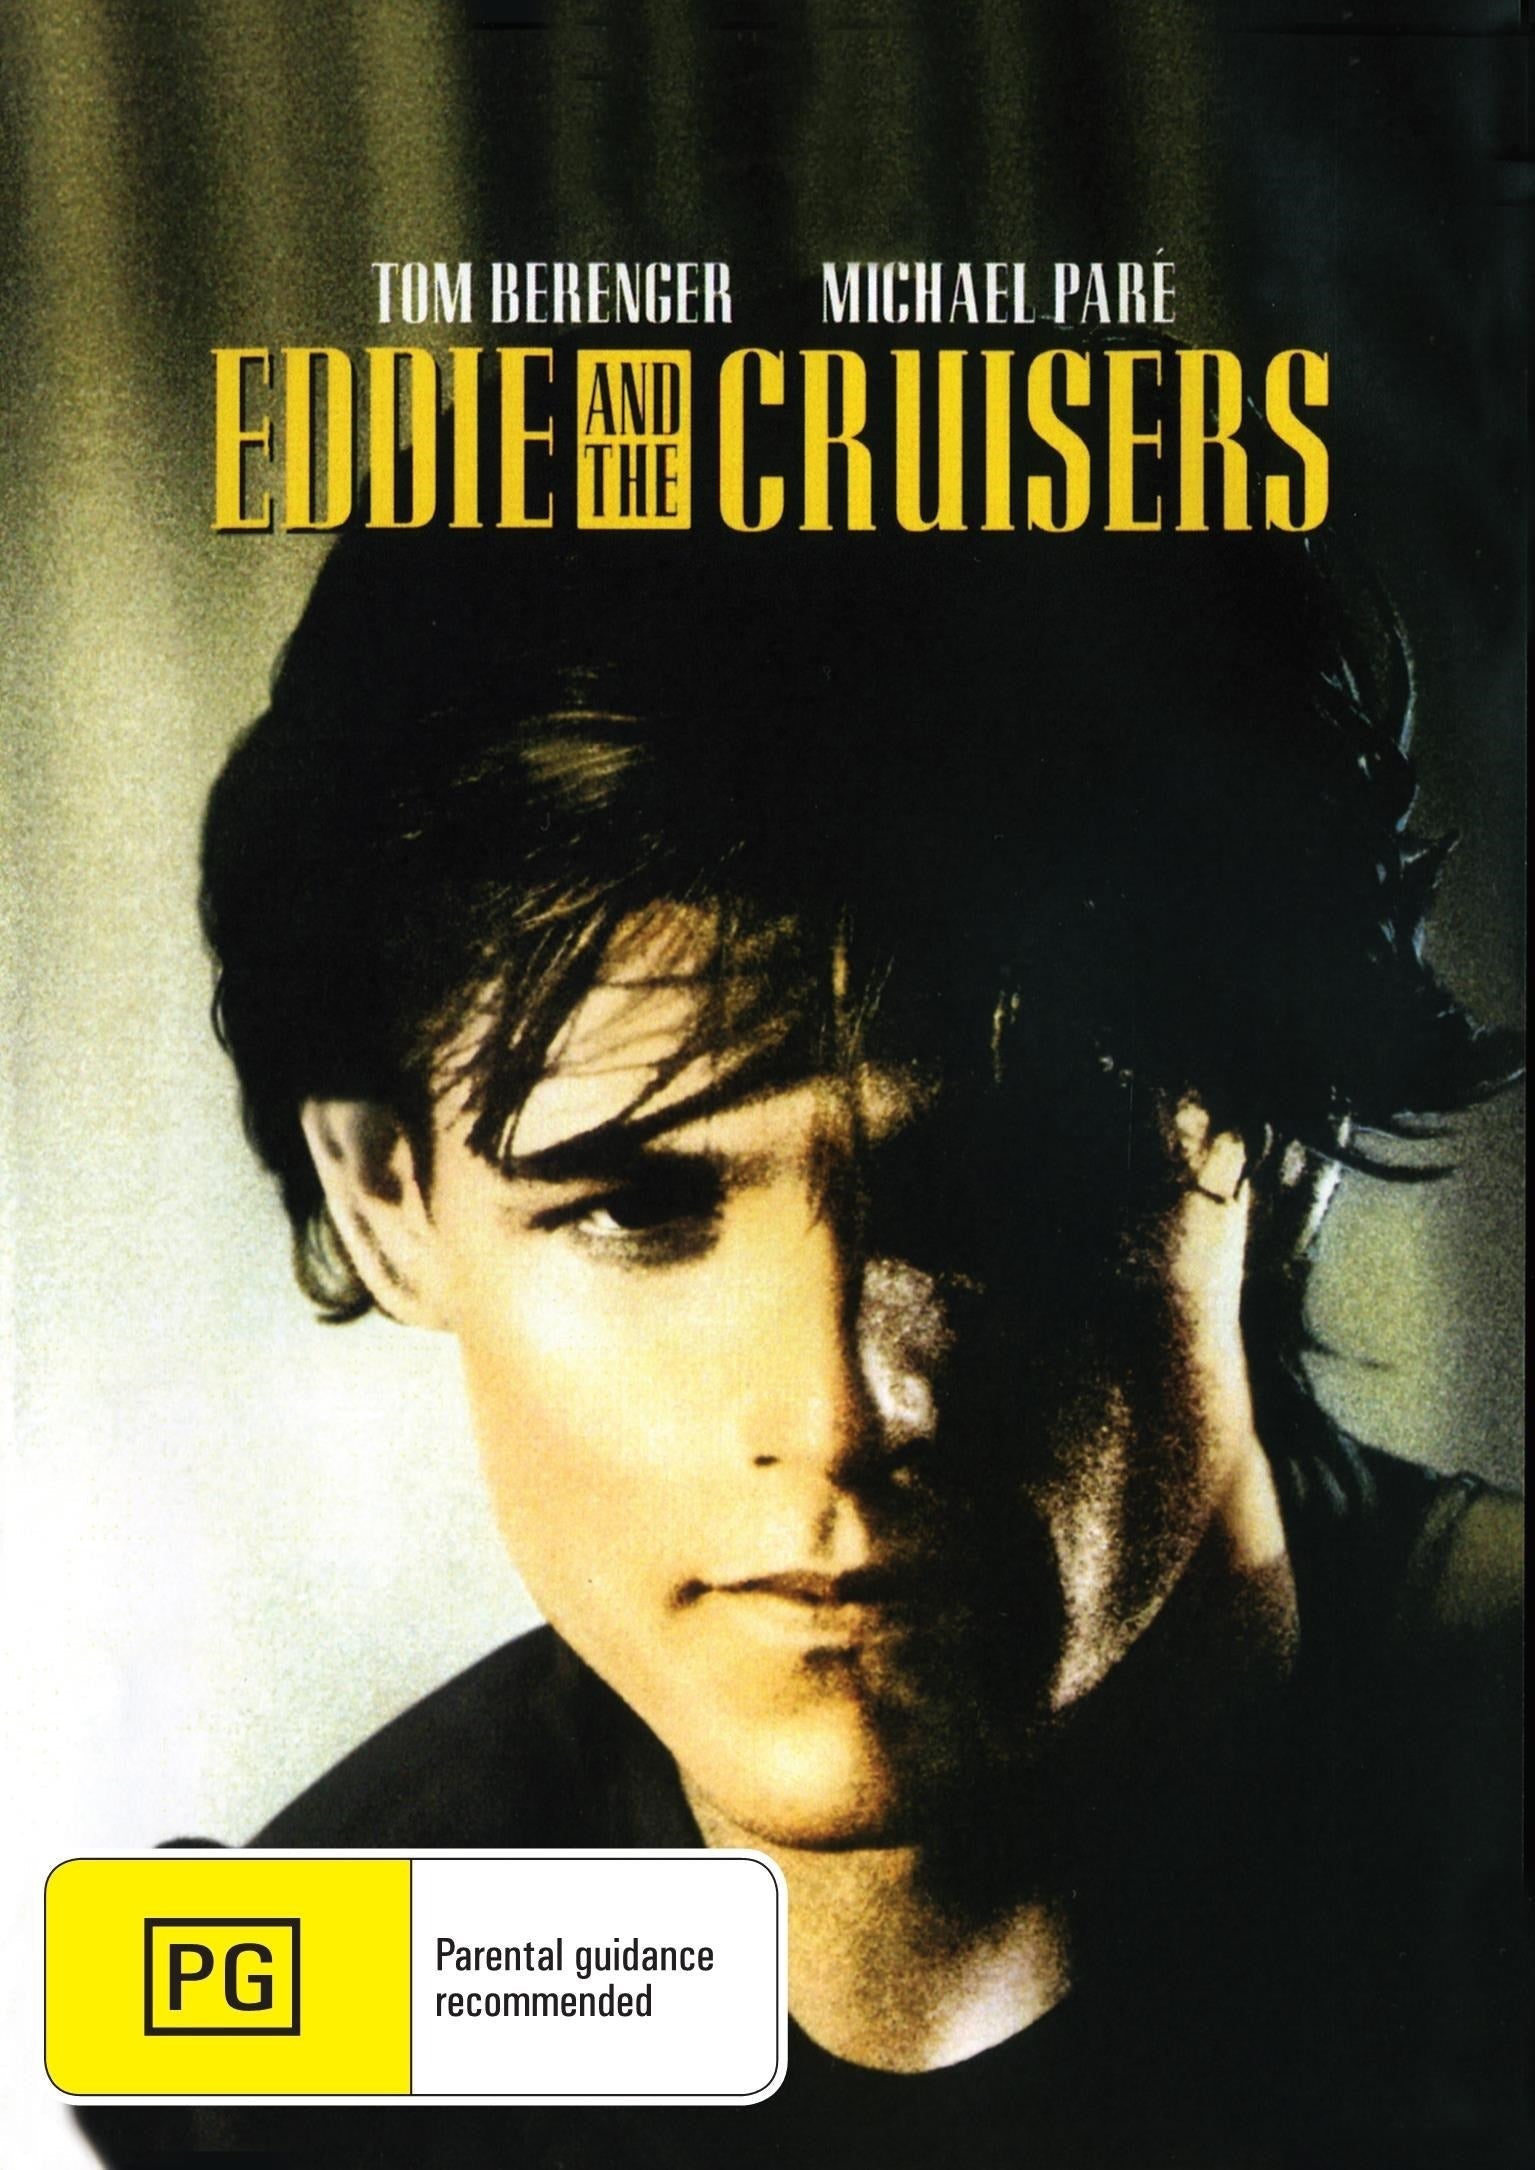 Eddie and the Cruisers rareandcollectibledvds